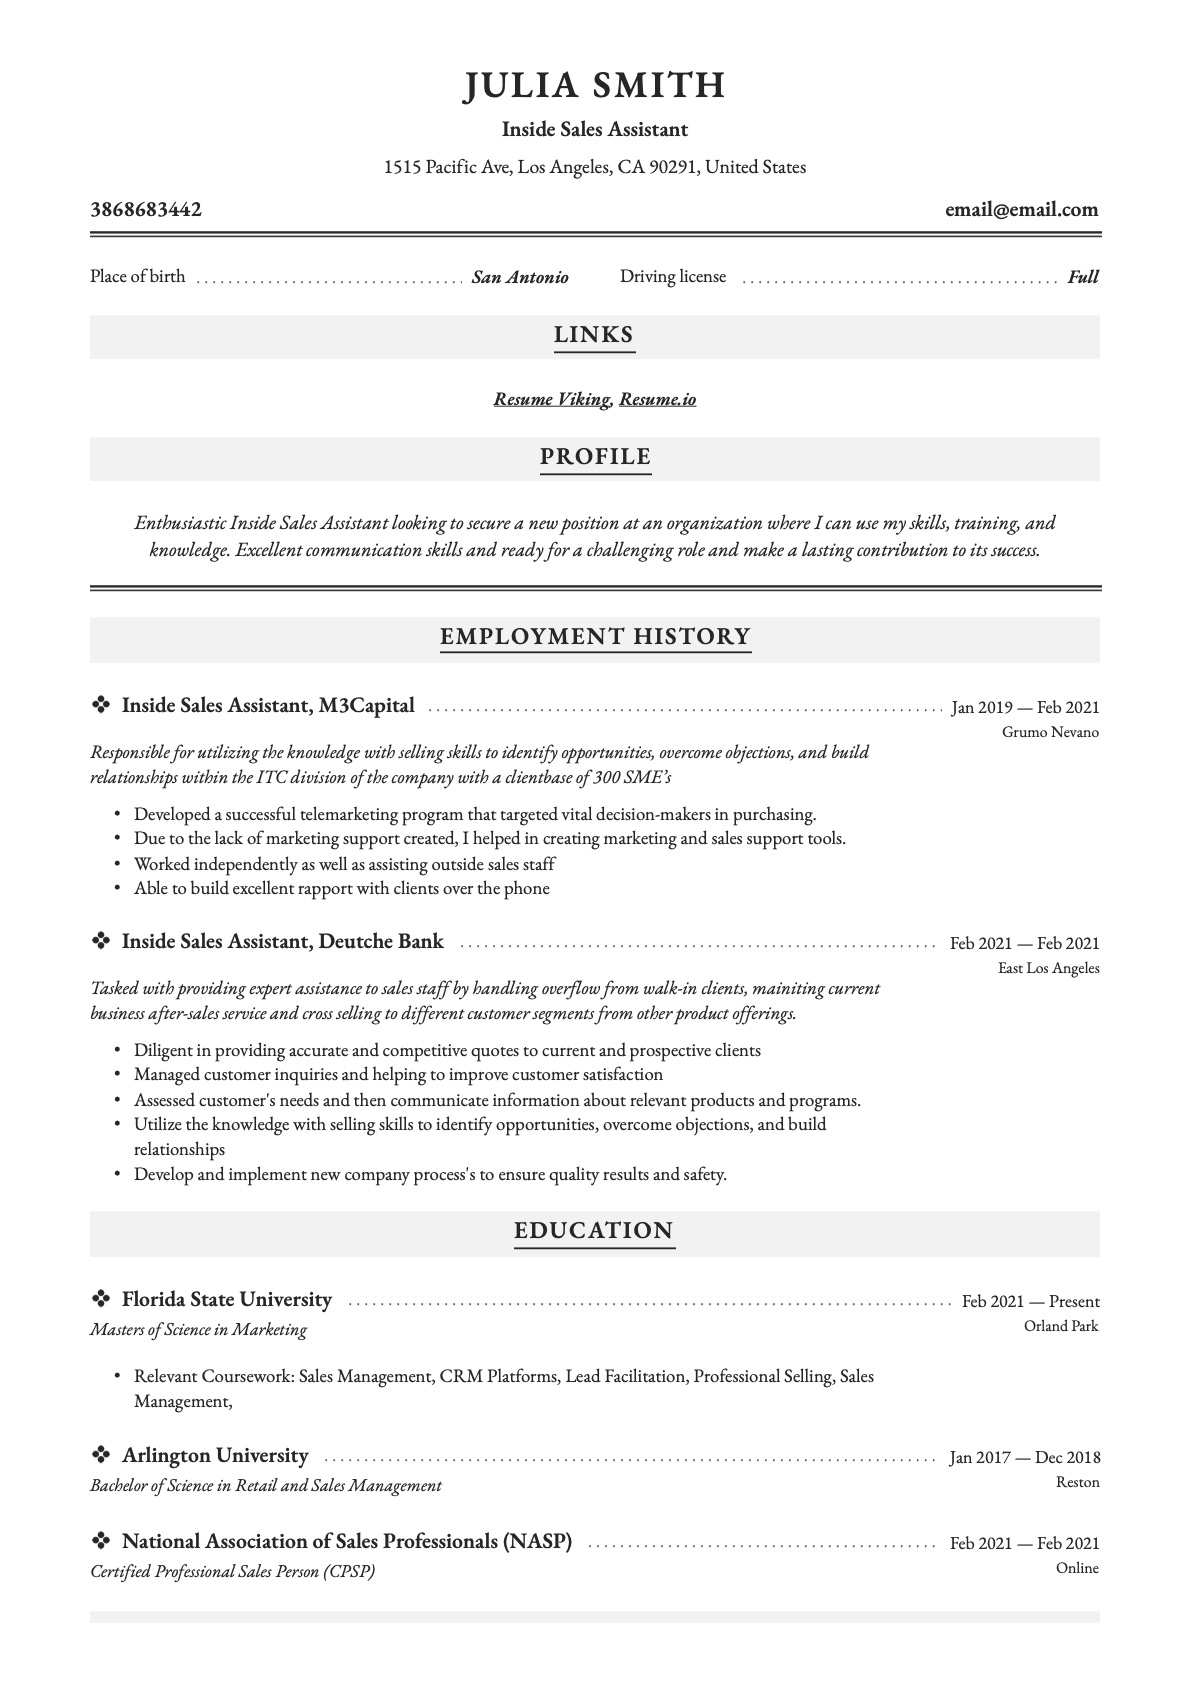 Example Resume Inside Sales Assistant-10